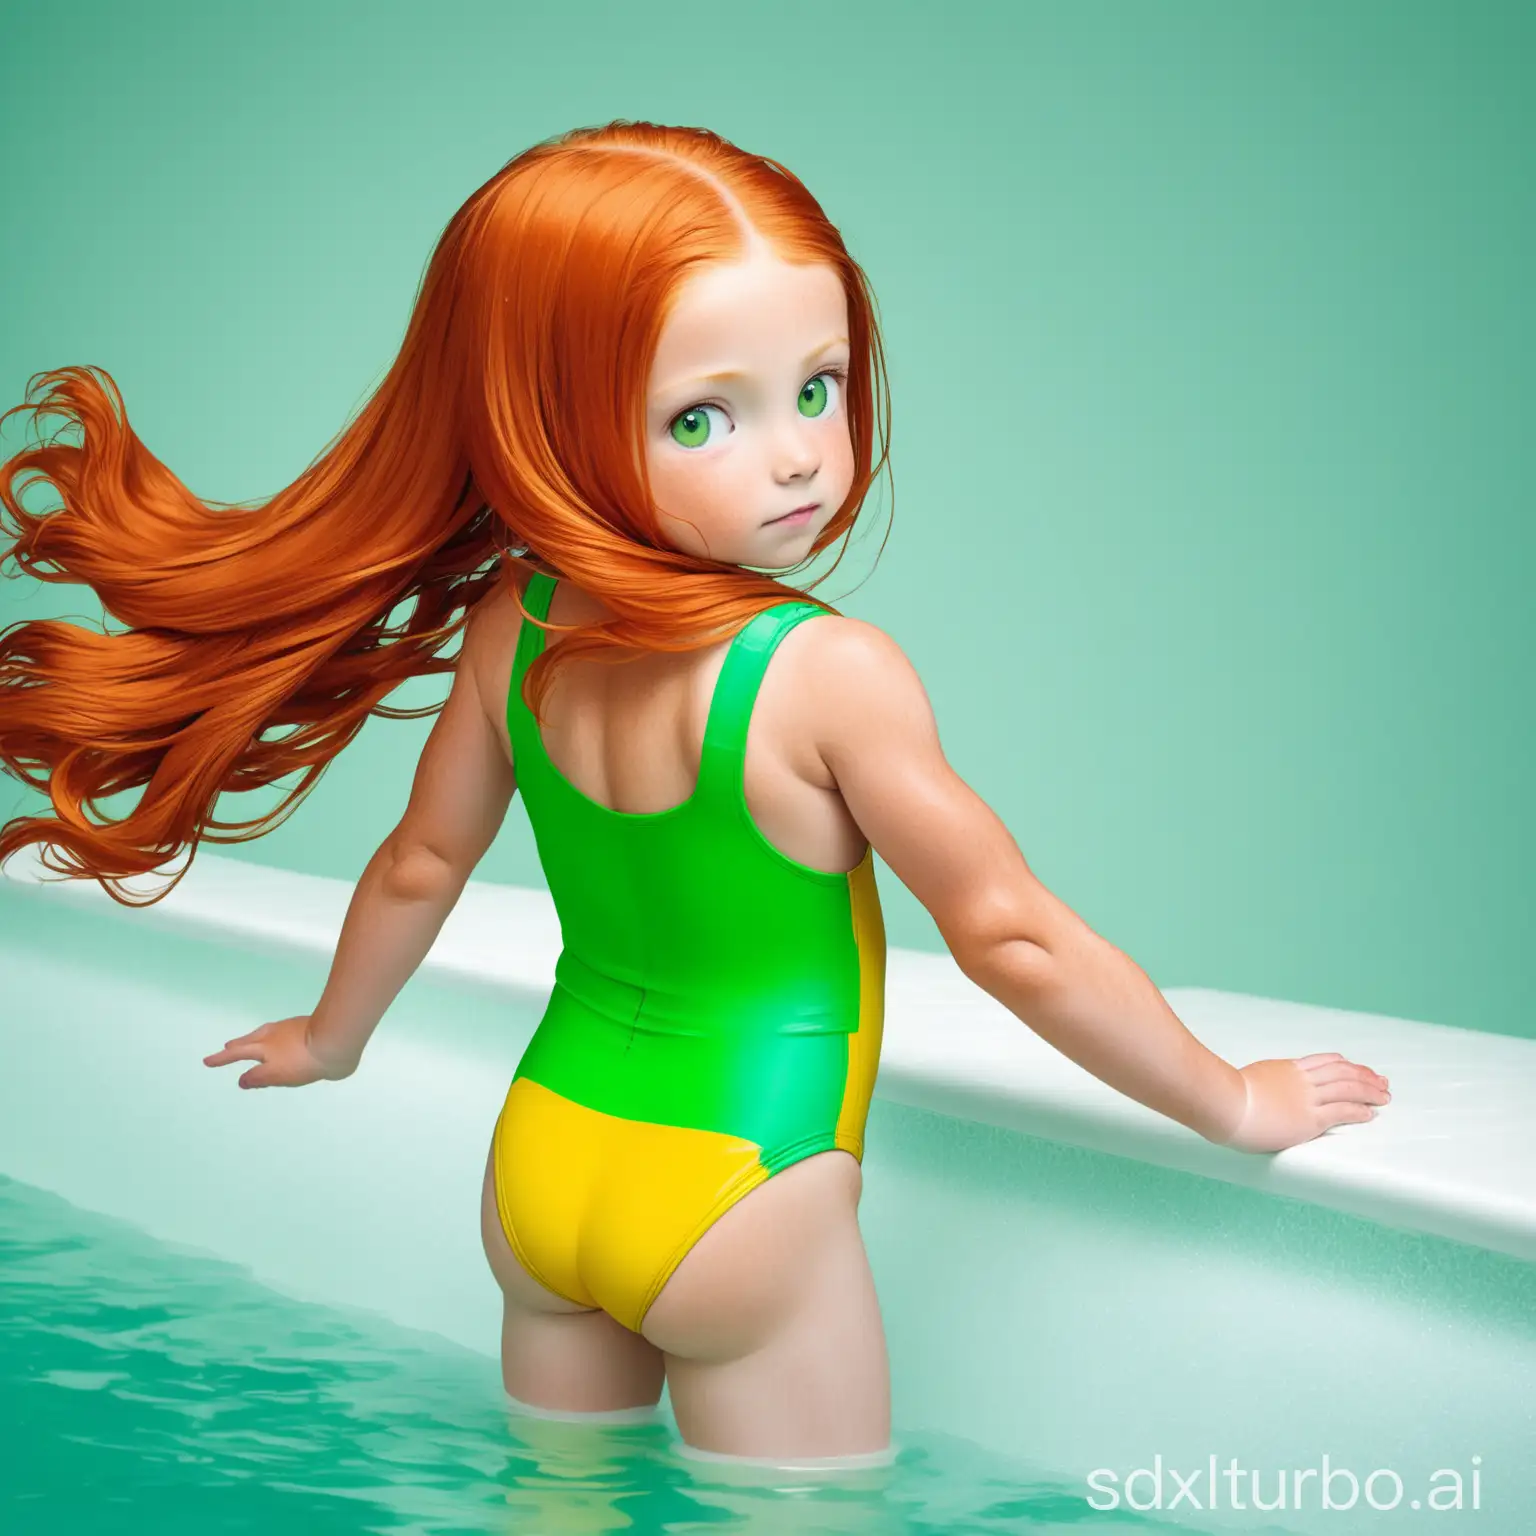 Muscular 8YearOld Girl with Long Ginger Hair and Green Eyes in Vibrant Bathing Suit Backwards